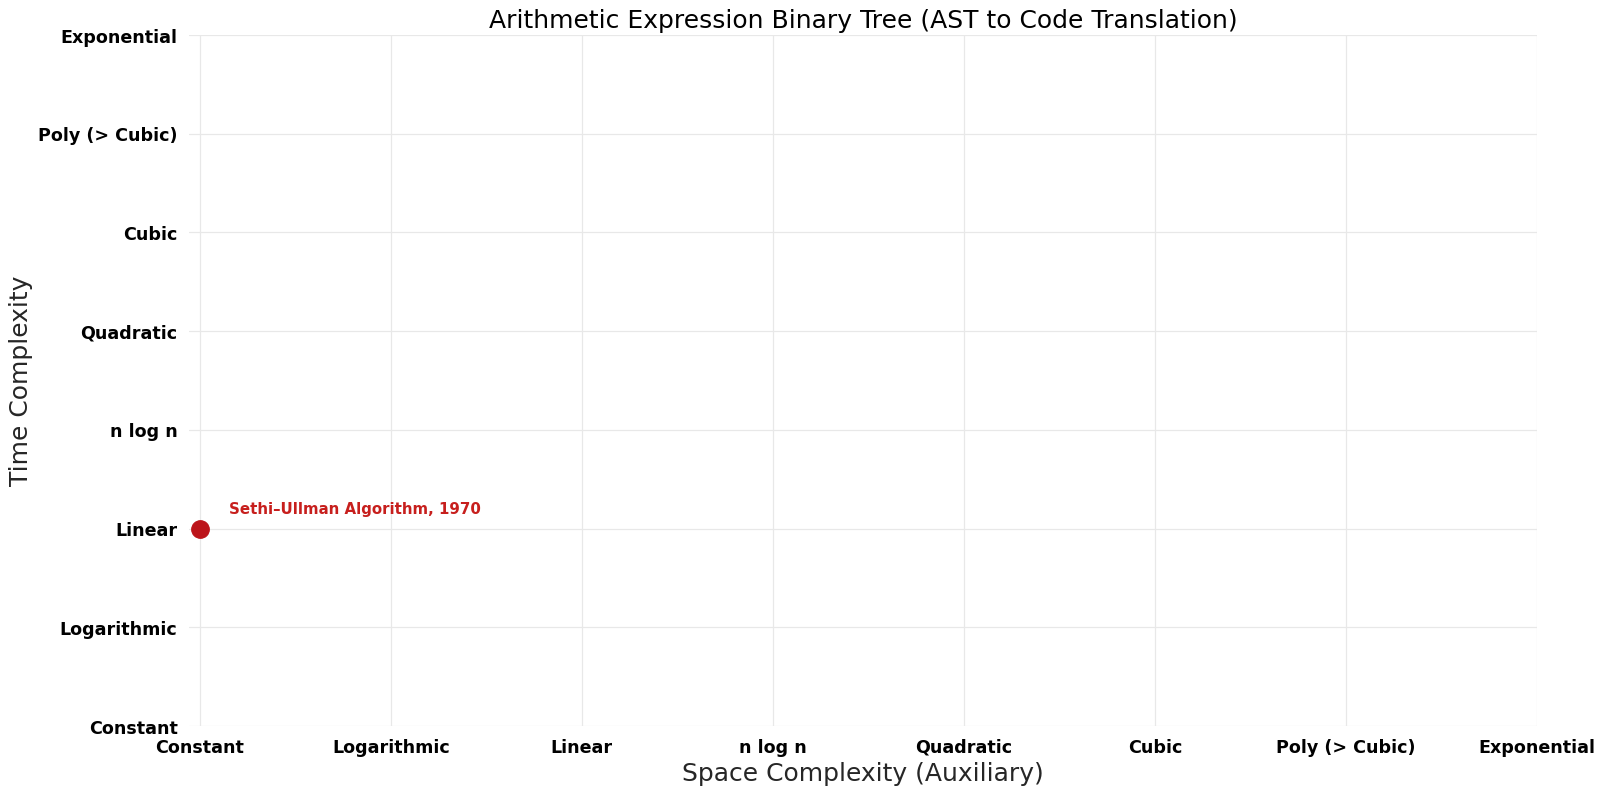 AST to Code Translation - Arithmetic Expression Binary Tree - Pareto Frontier.png